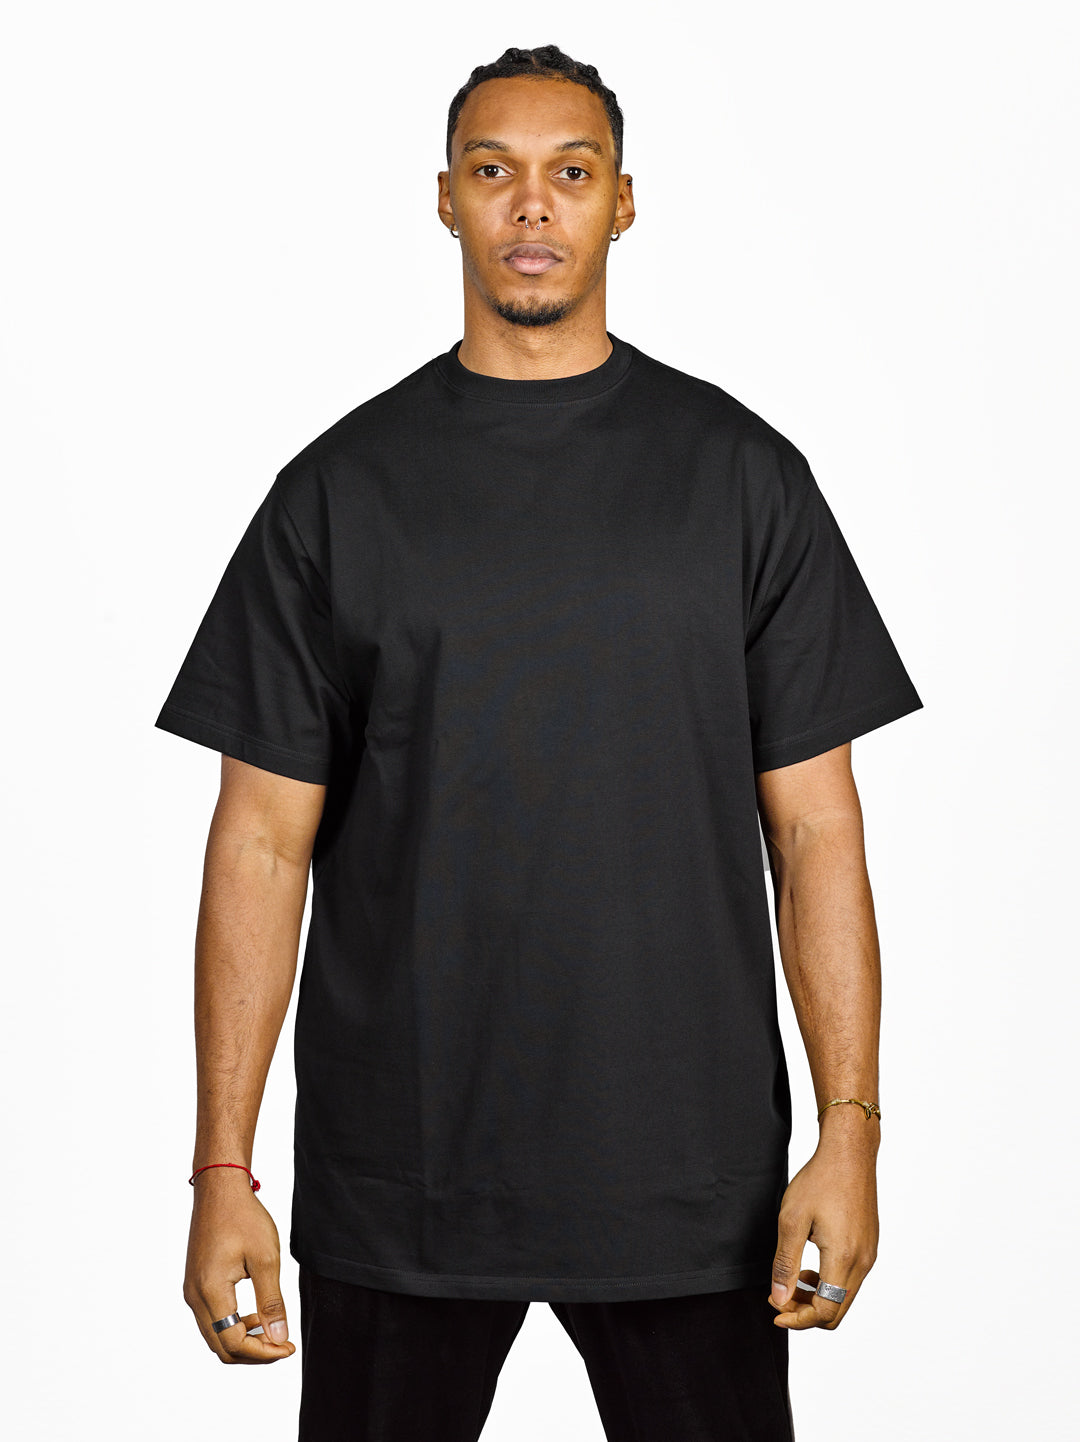 Exetees Big & Tall Comfort Round Neck T-Shirt - Black